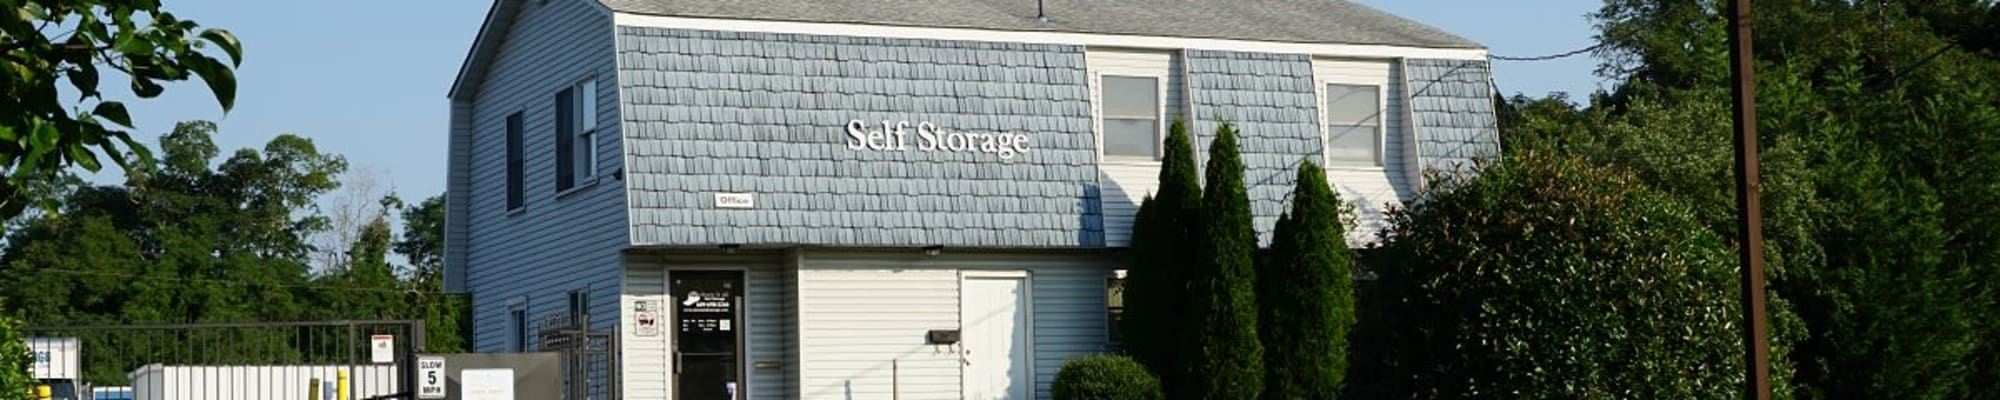 Store It All Self Storage - Barnegat storage units for rent in Barnegat, New Jersey